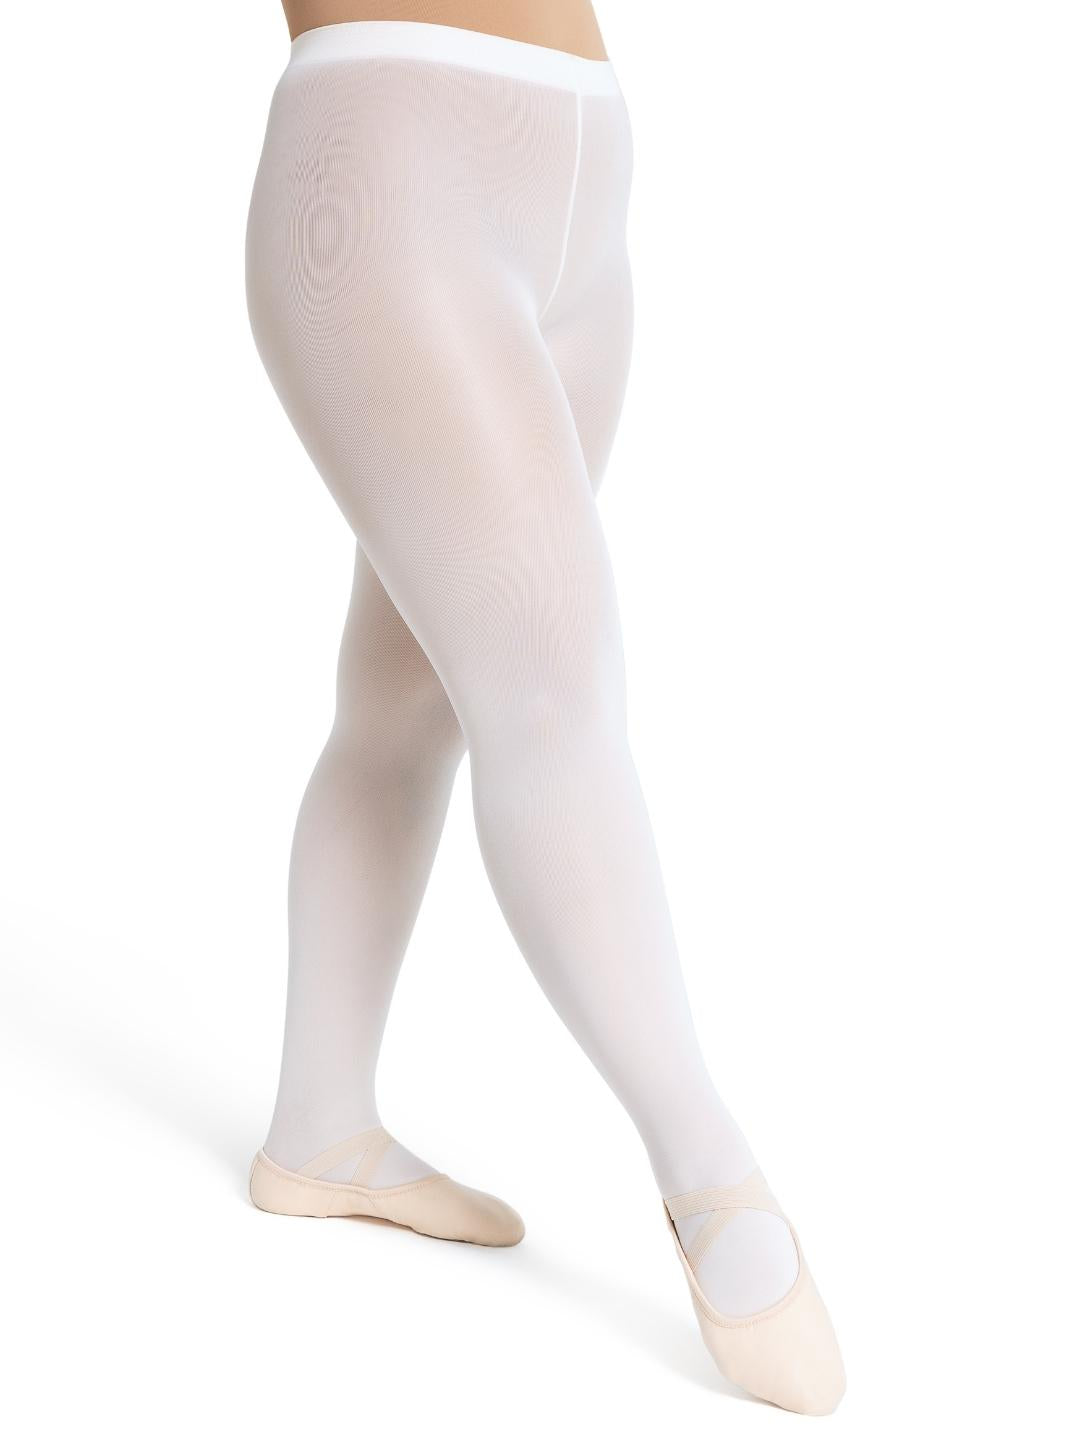 Toddler Transition Tights with Self Knit Waistband - Convertible Tights, Capezio 1916X